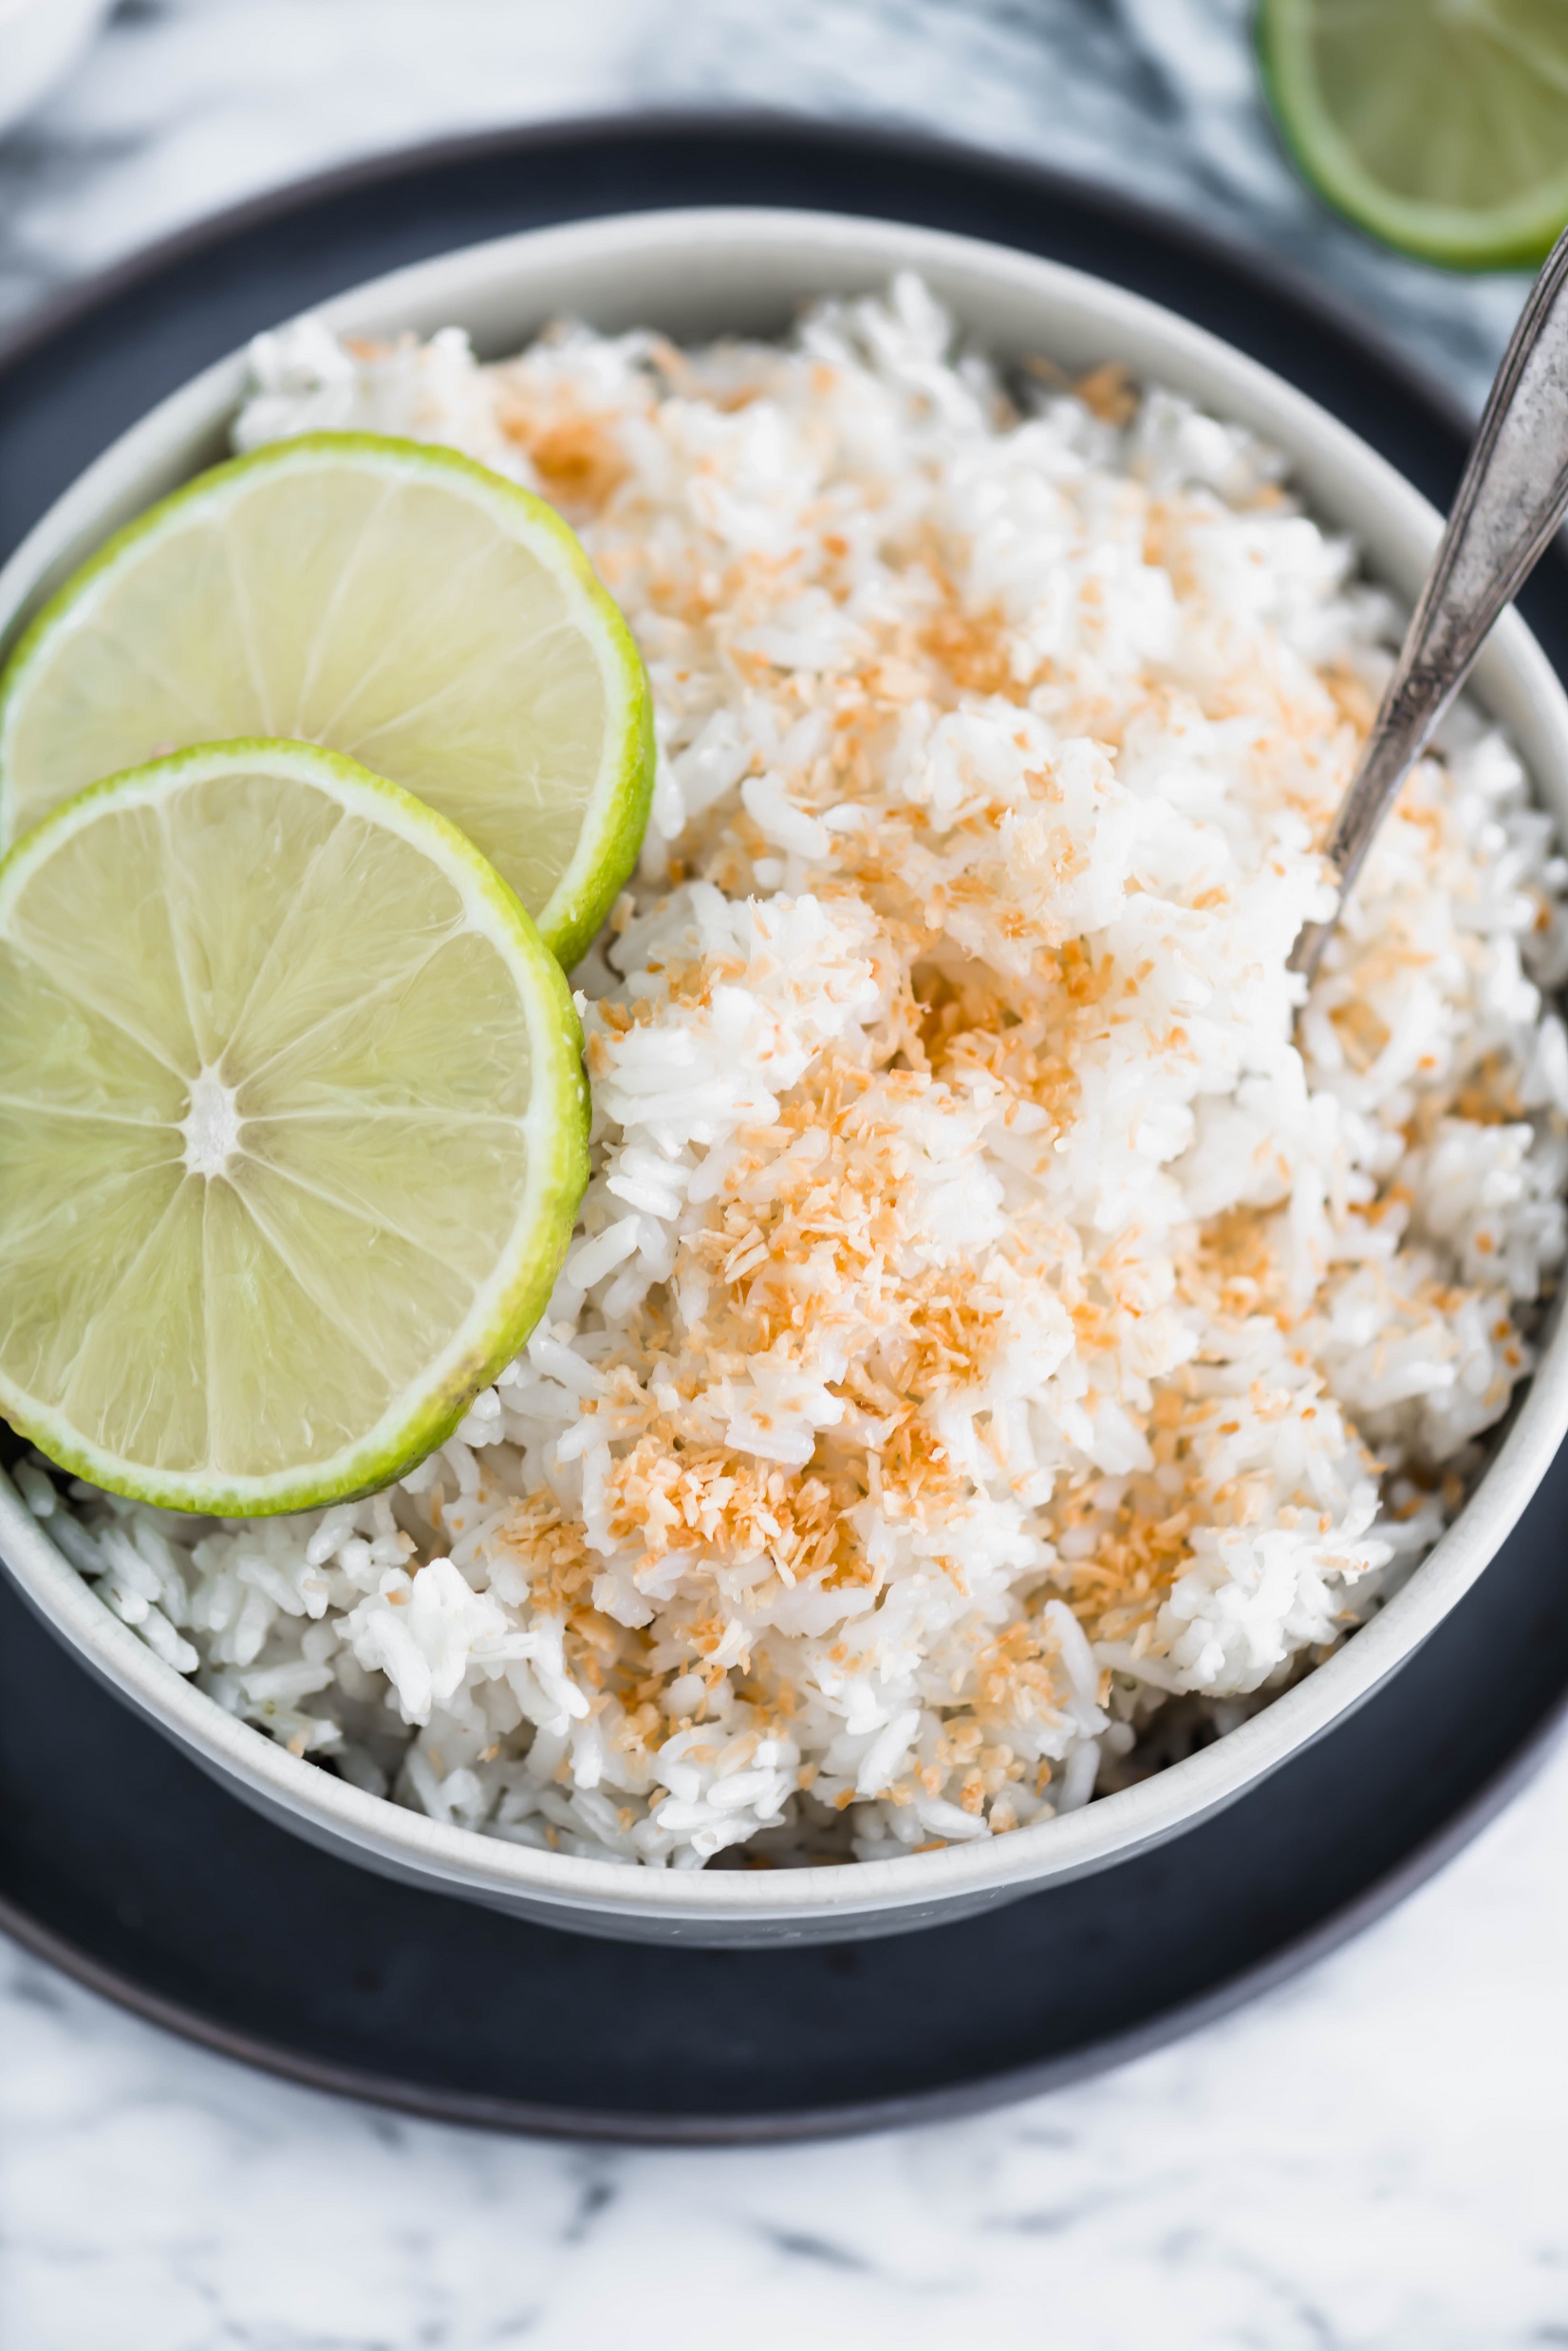 Instant Pot Coconut Lime Rice is a delicious and simple side dish worthy of busy weeknights and dinner party guests. Full of tropical flavors and done in minutes.